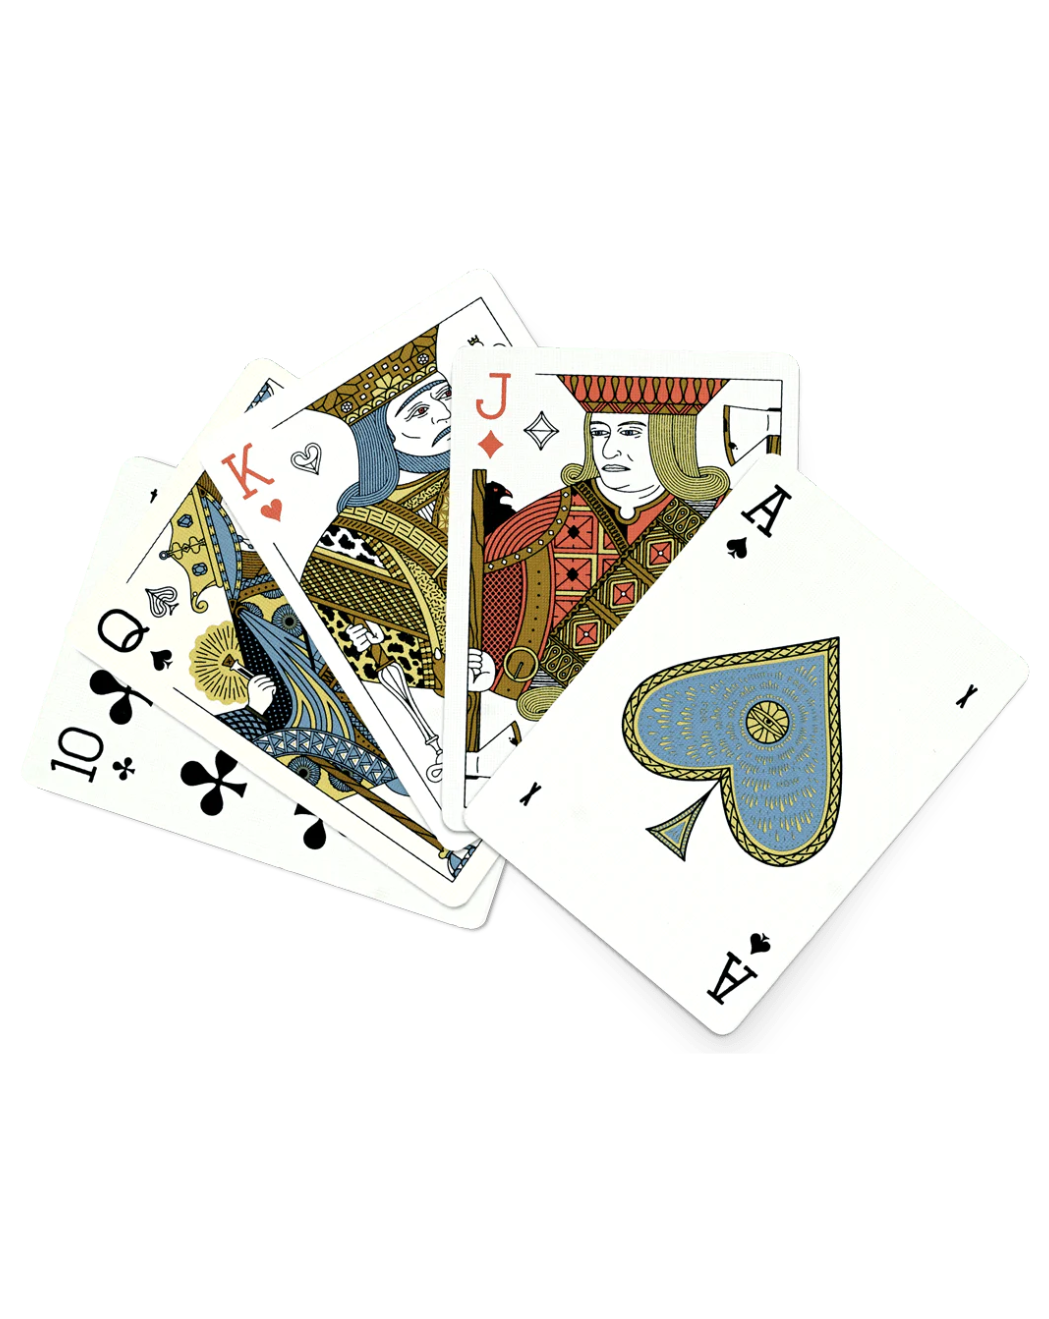 MISC Goods | Playing Cards | Special Edition Std.